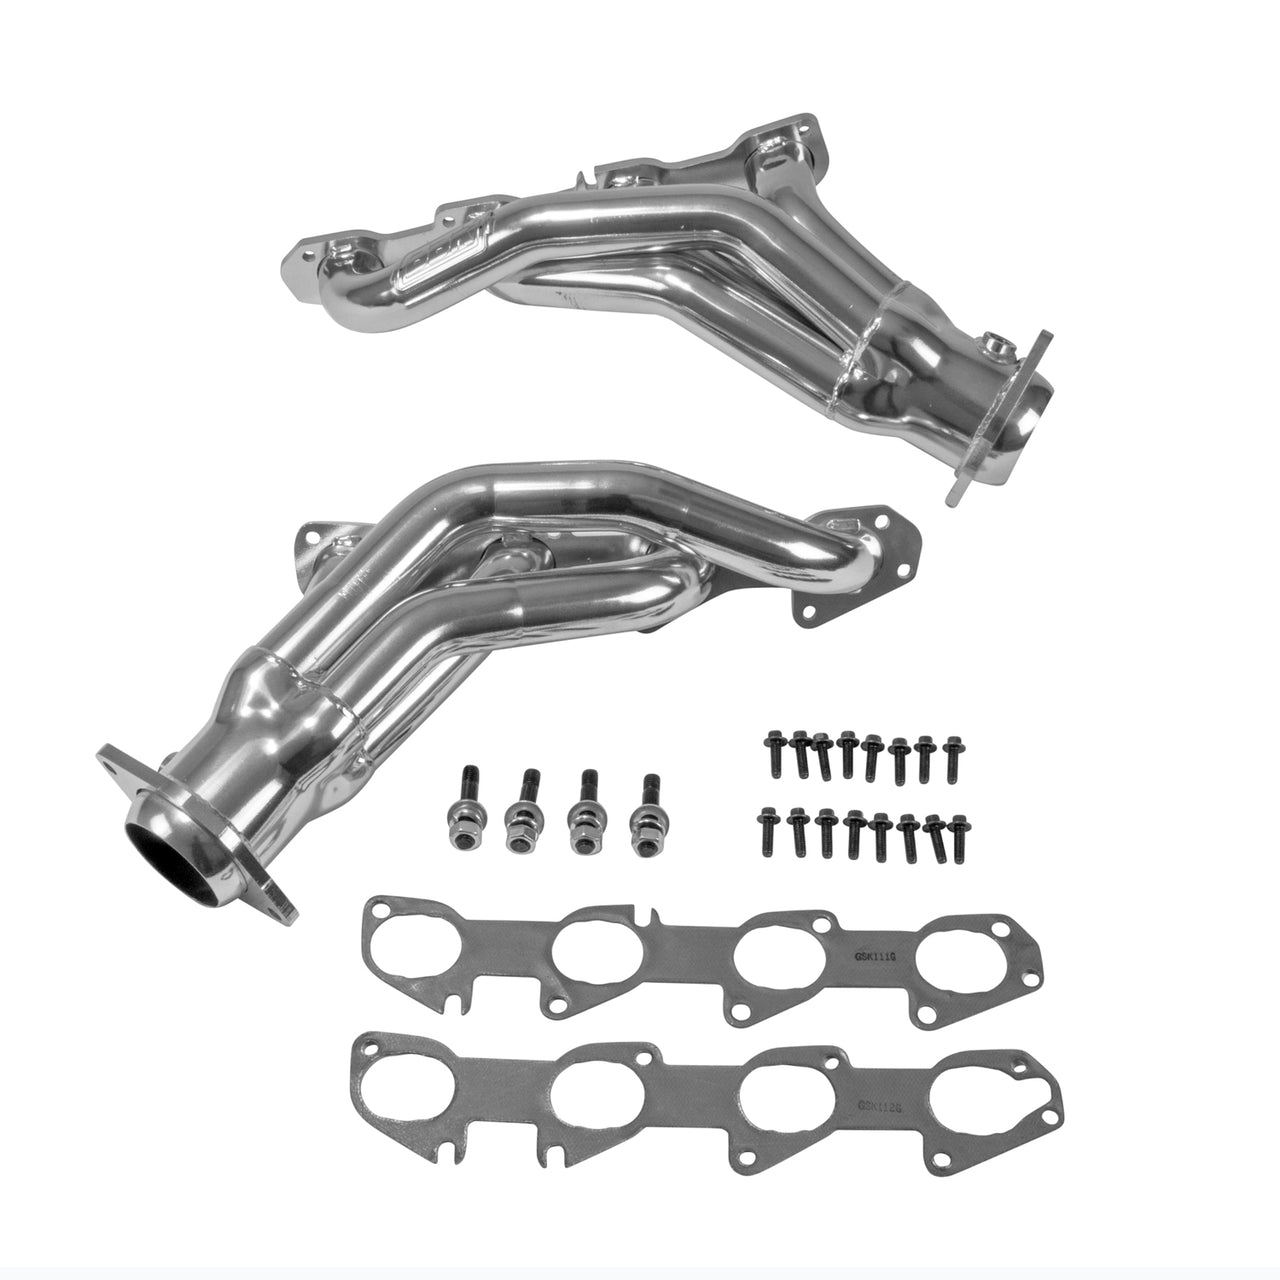 2011-2020 DODGE 6.4L CHALLENGER CHARGER HEMI CARS 1-7/8 SHORTY HEADERS (POLISHED SILVER CERAMIC)